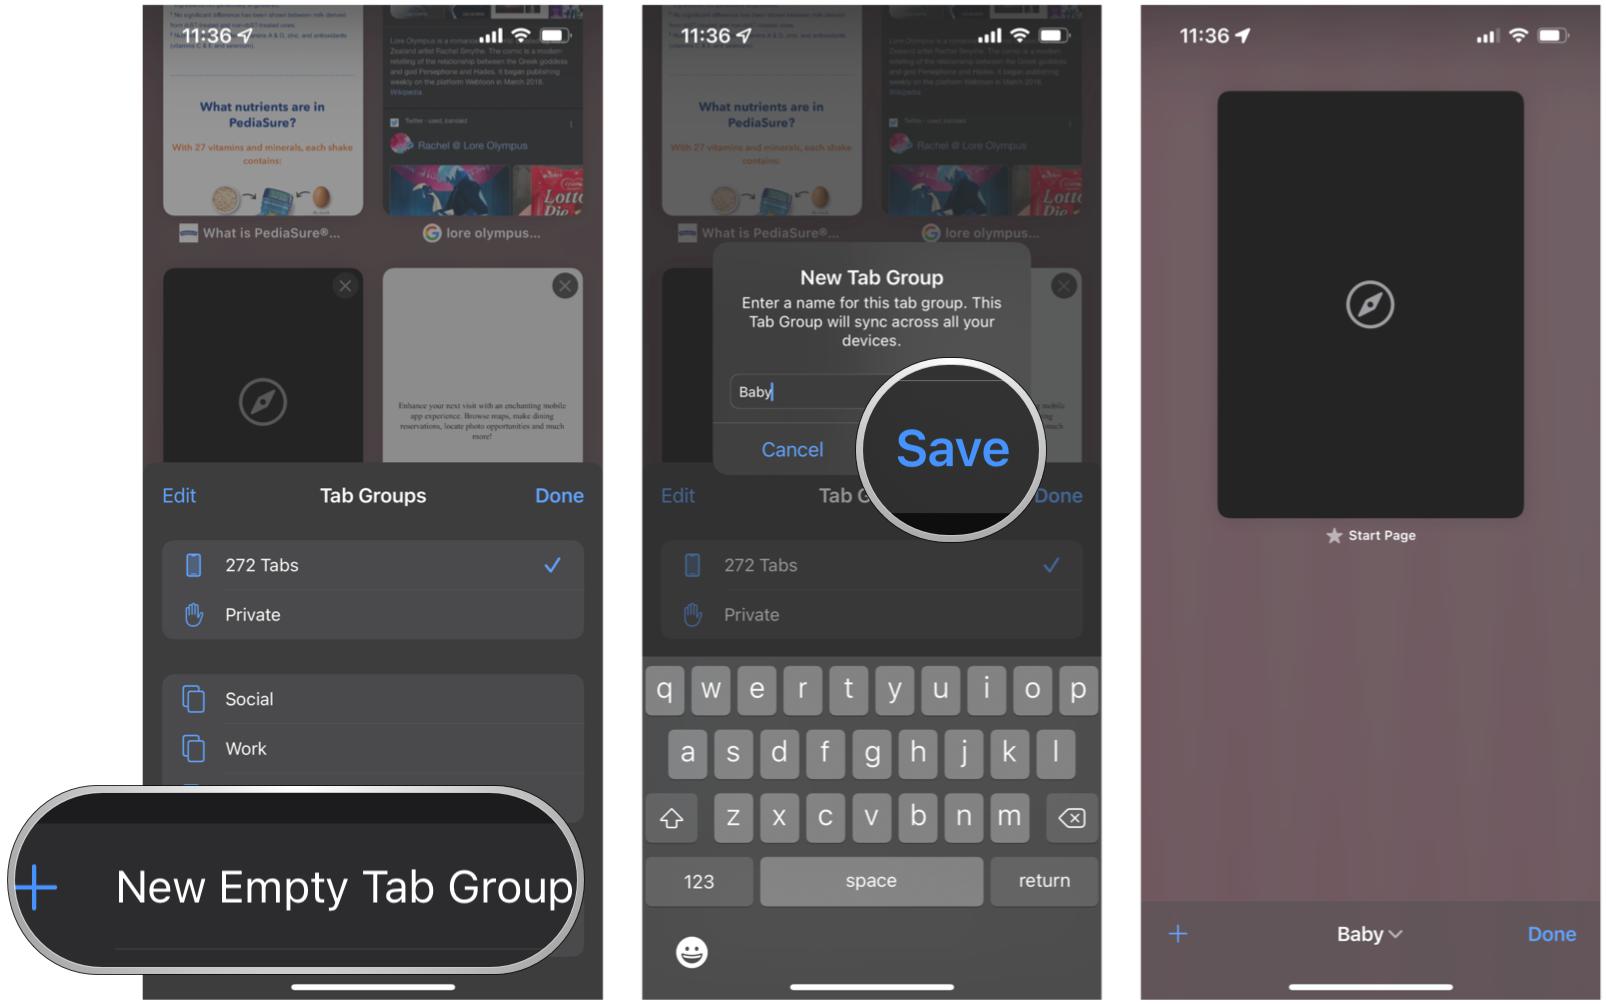 Create new tab group in Safari on iPhone: Tap New Empty Tab Group, give group a name, tap Save